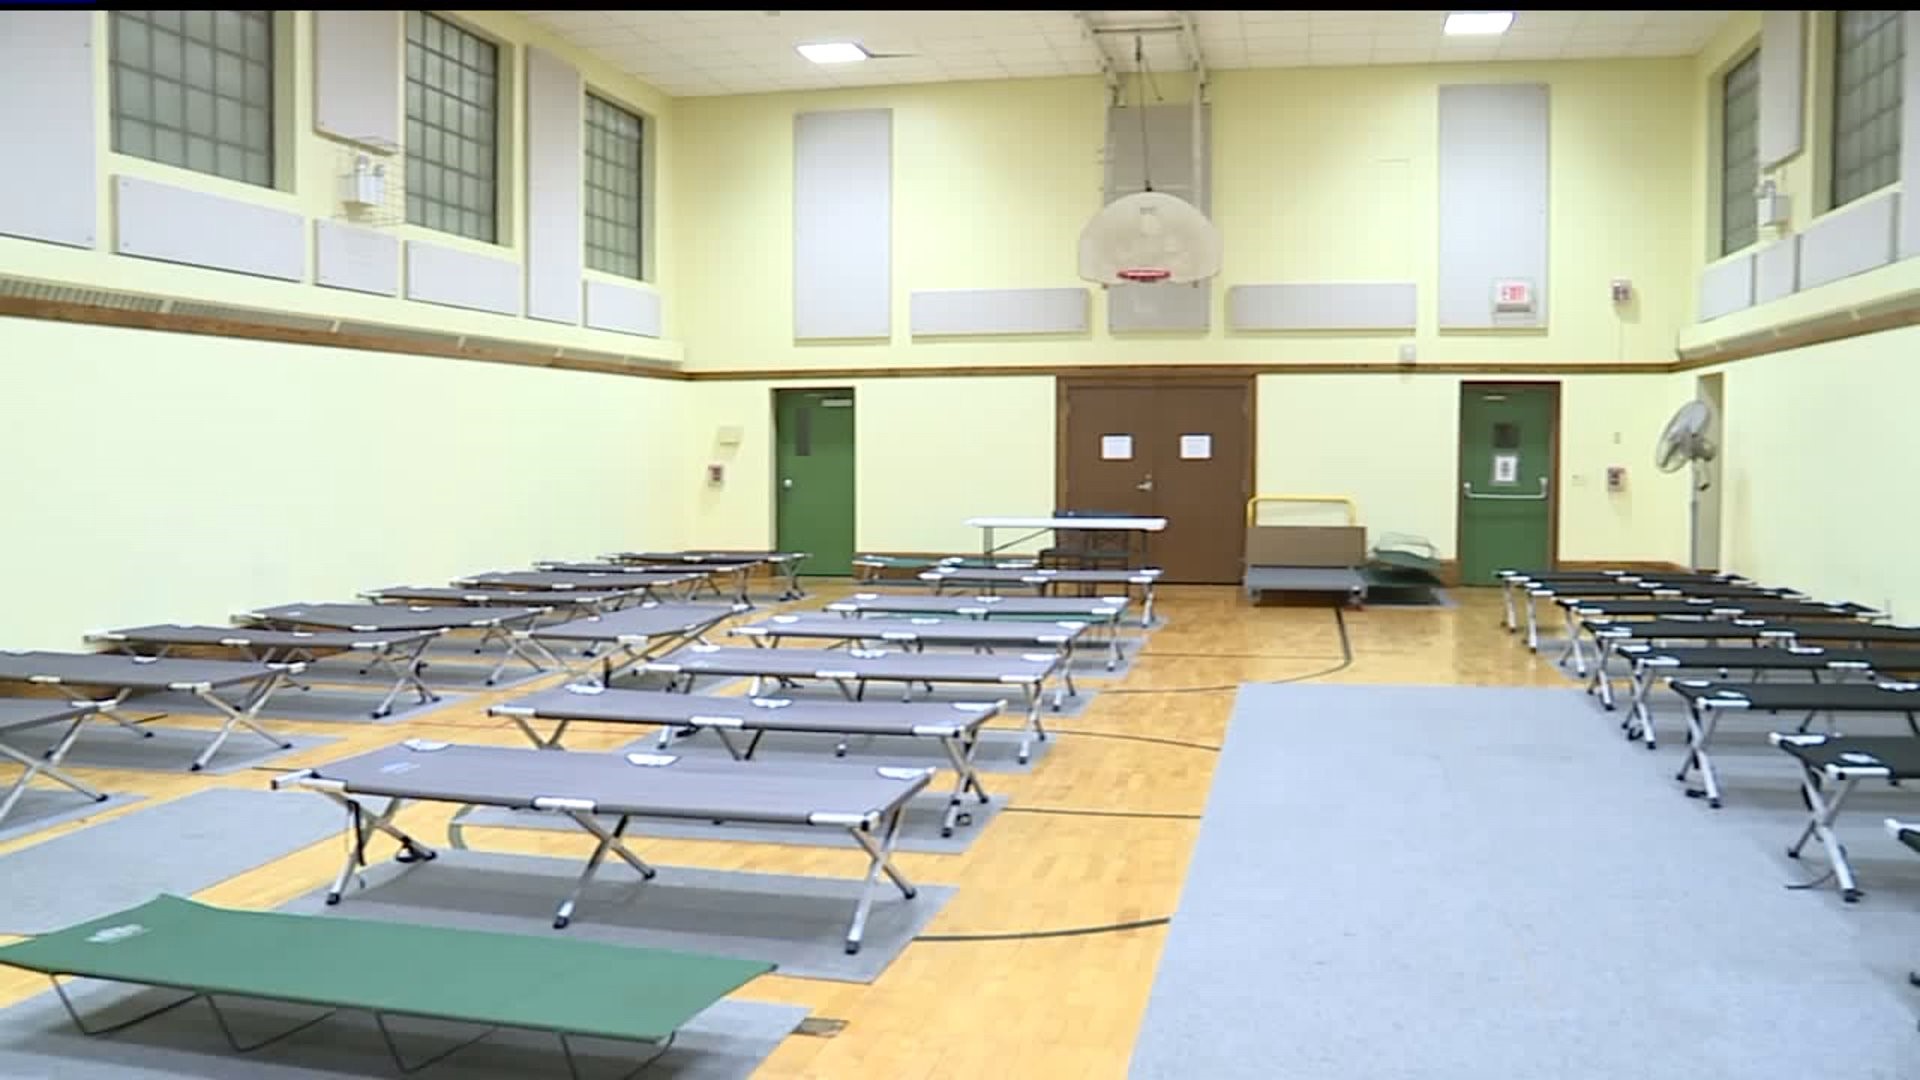 Downtown Daily Bread in Harrisburg opens overnight shelter until March 31st; needs donations and volunteers